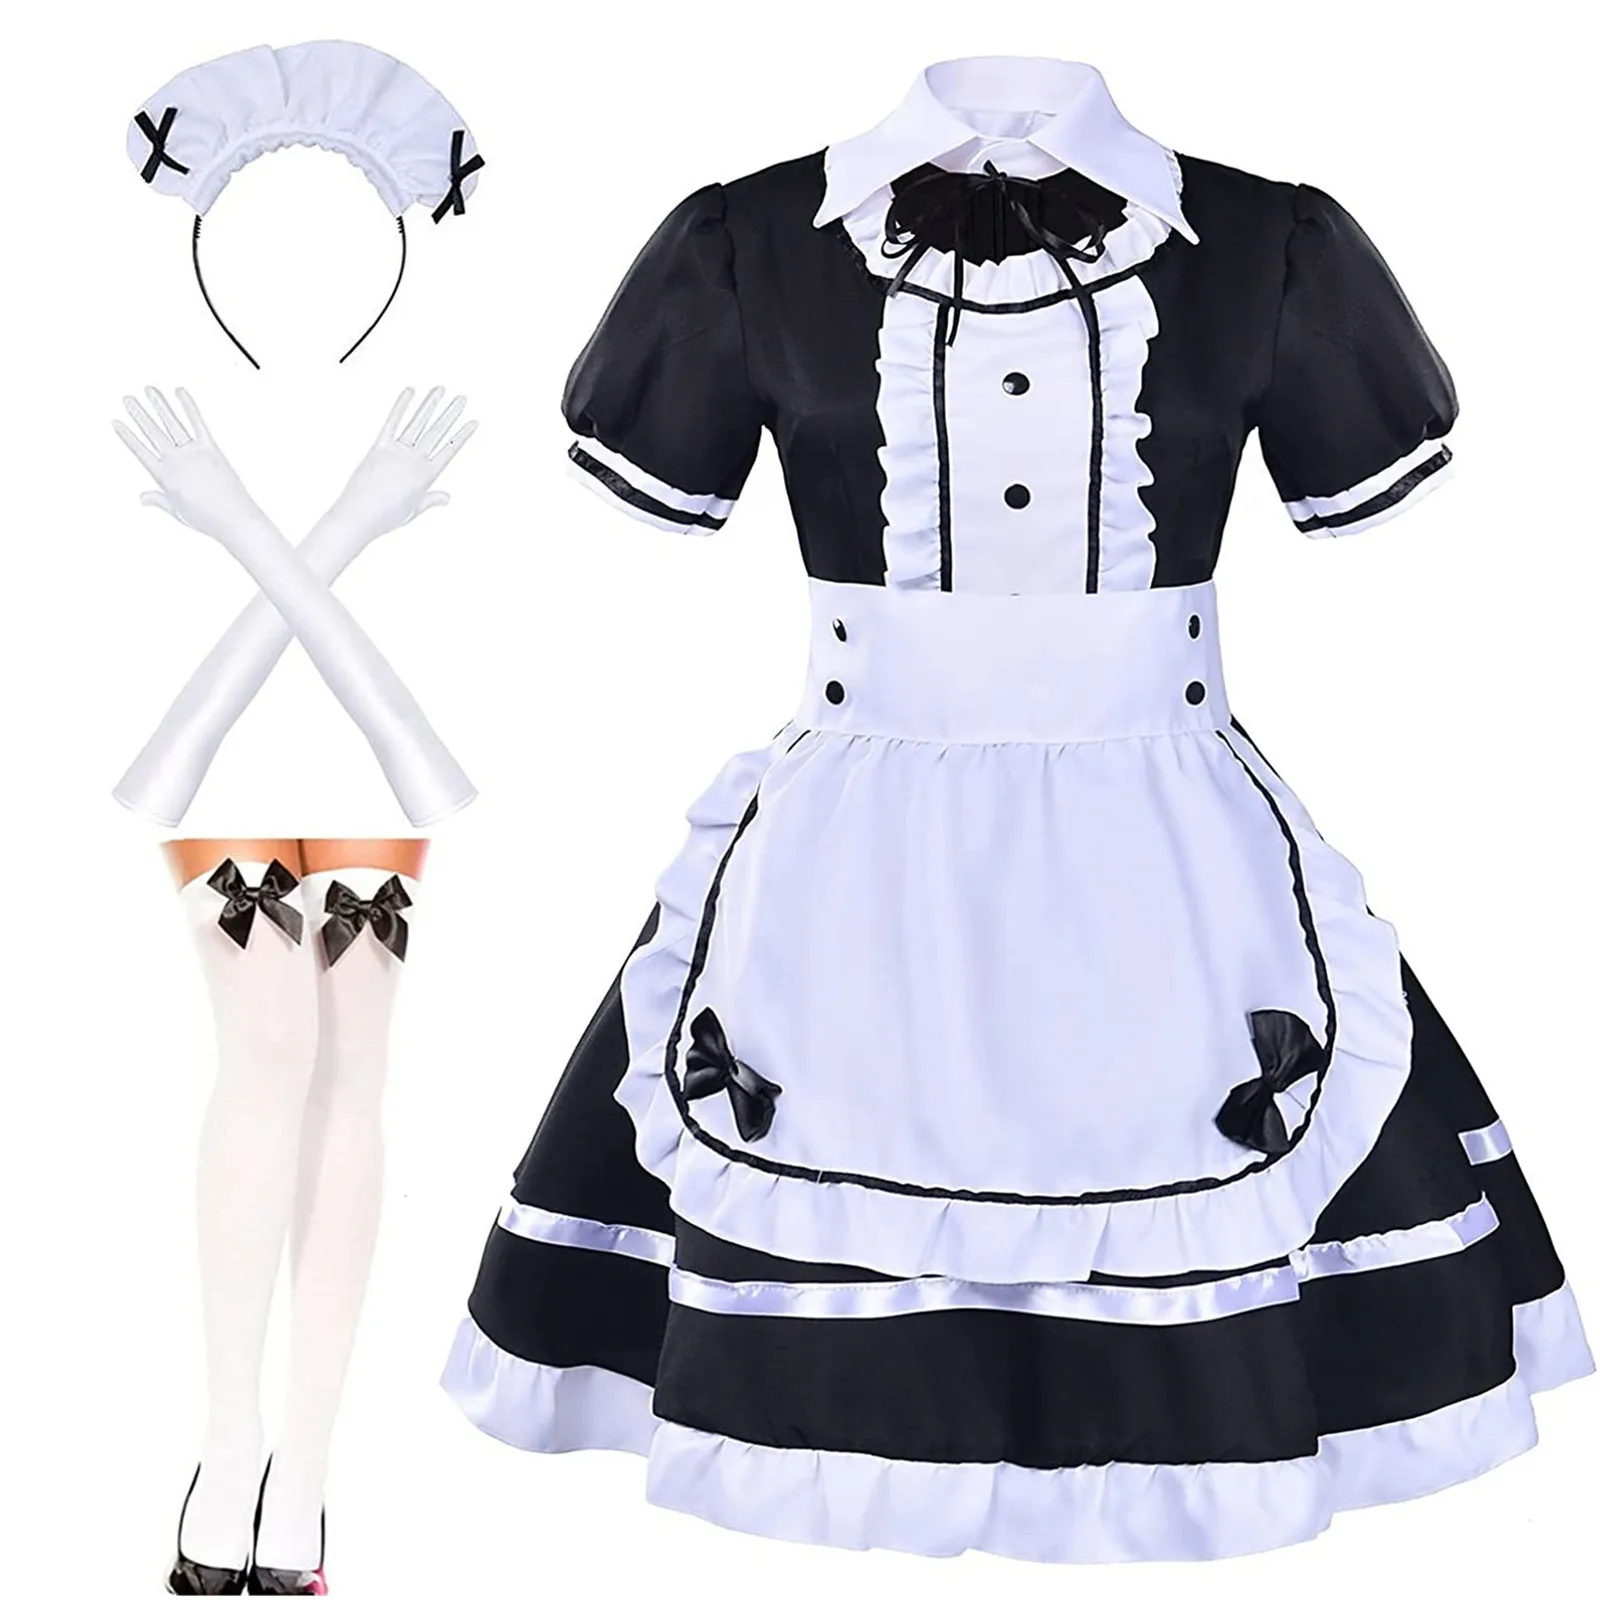 2021 Black Cute Maid Costumes Girls Women Lovely Maid Cosplay Costume Animation  Show Japanese Outfit Dress Clothes